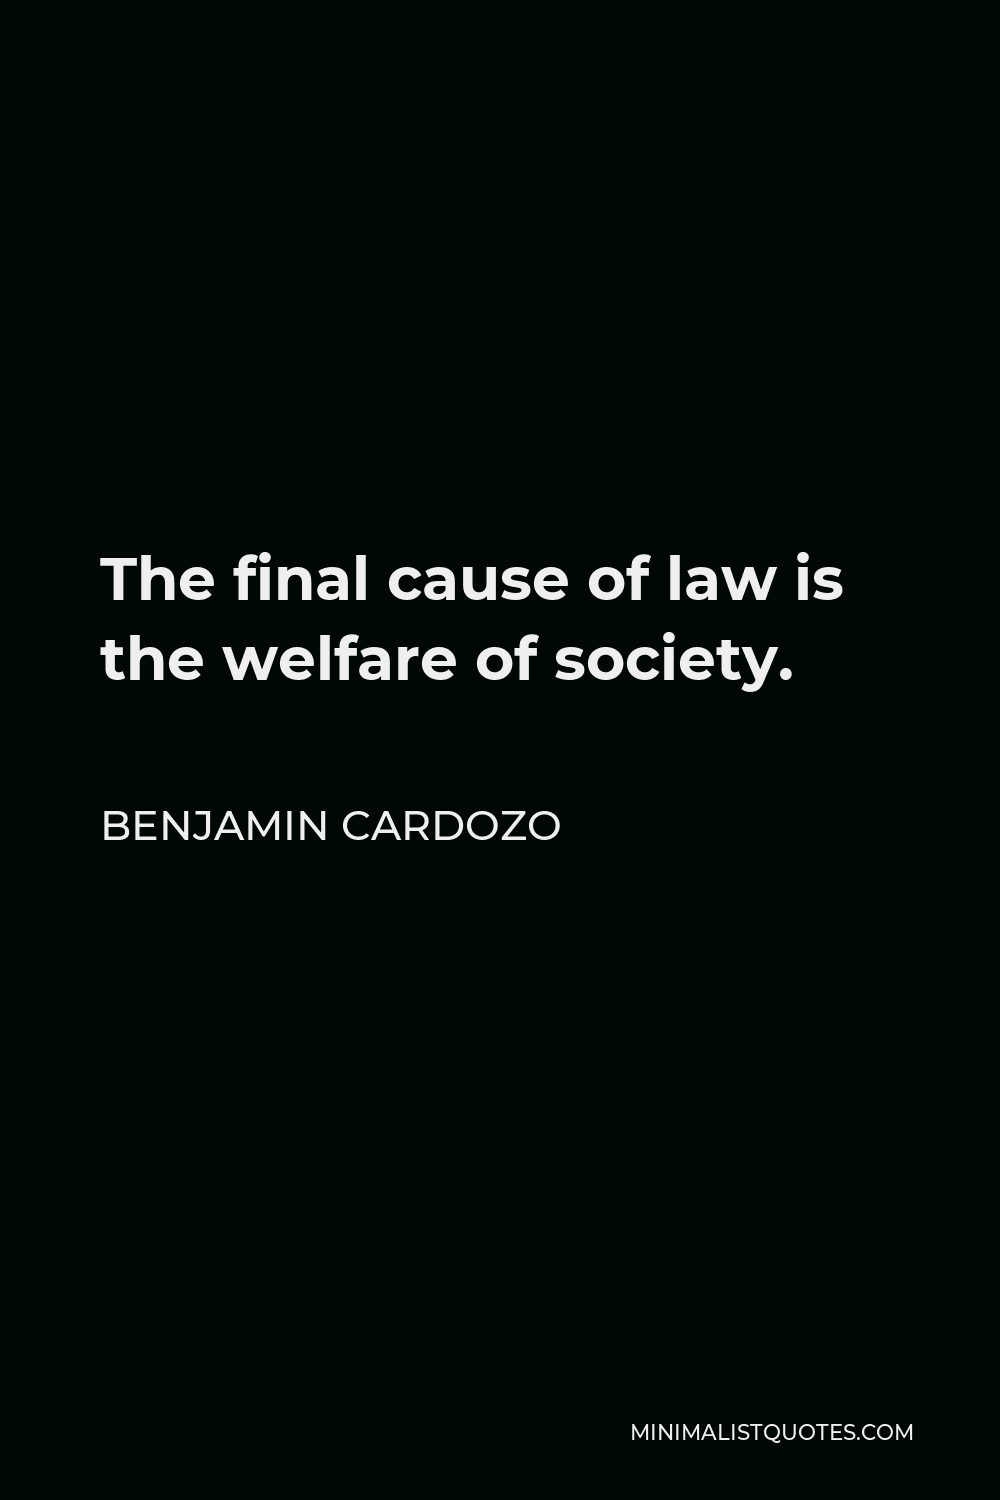 Benjamin Cardozo Quote - The final cause of law is the welfare of society.